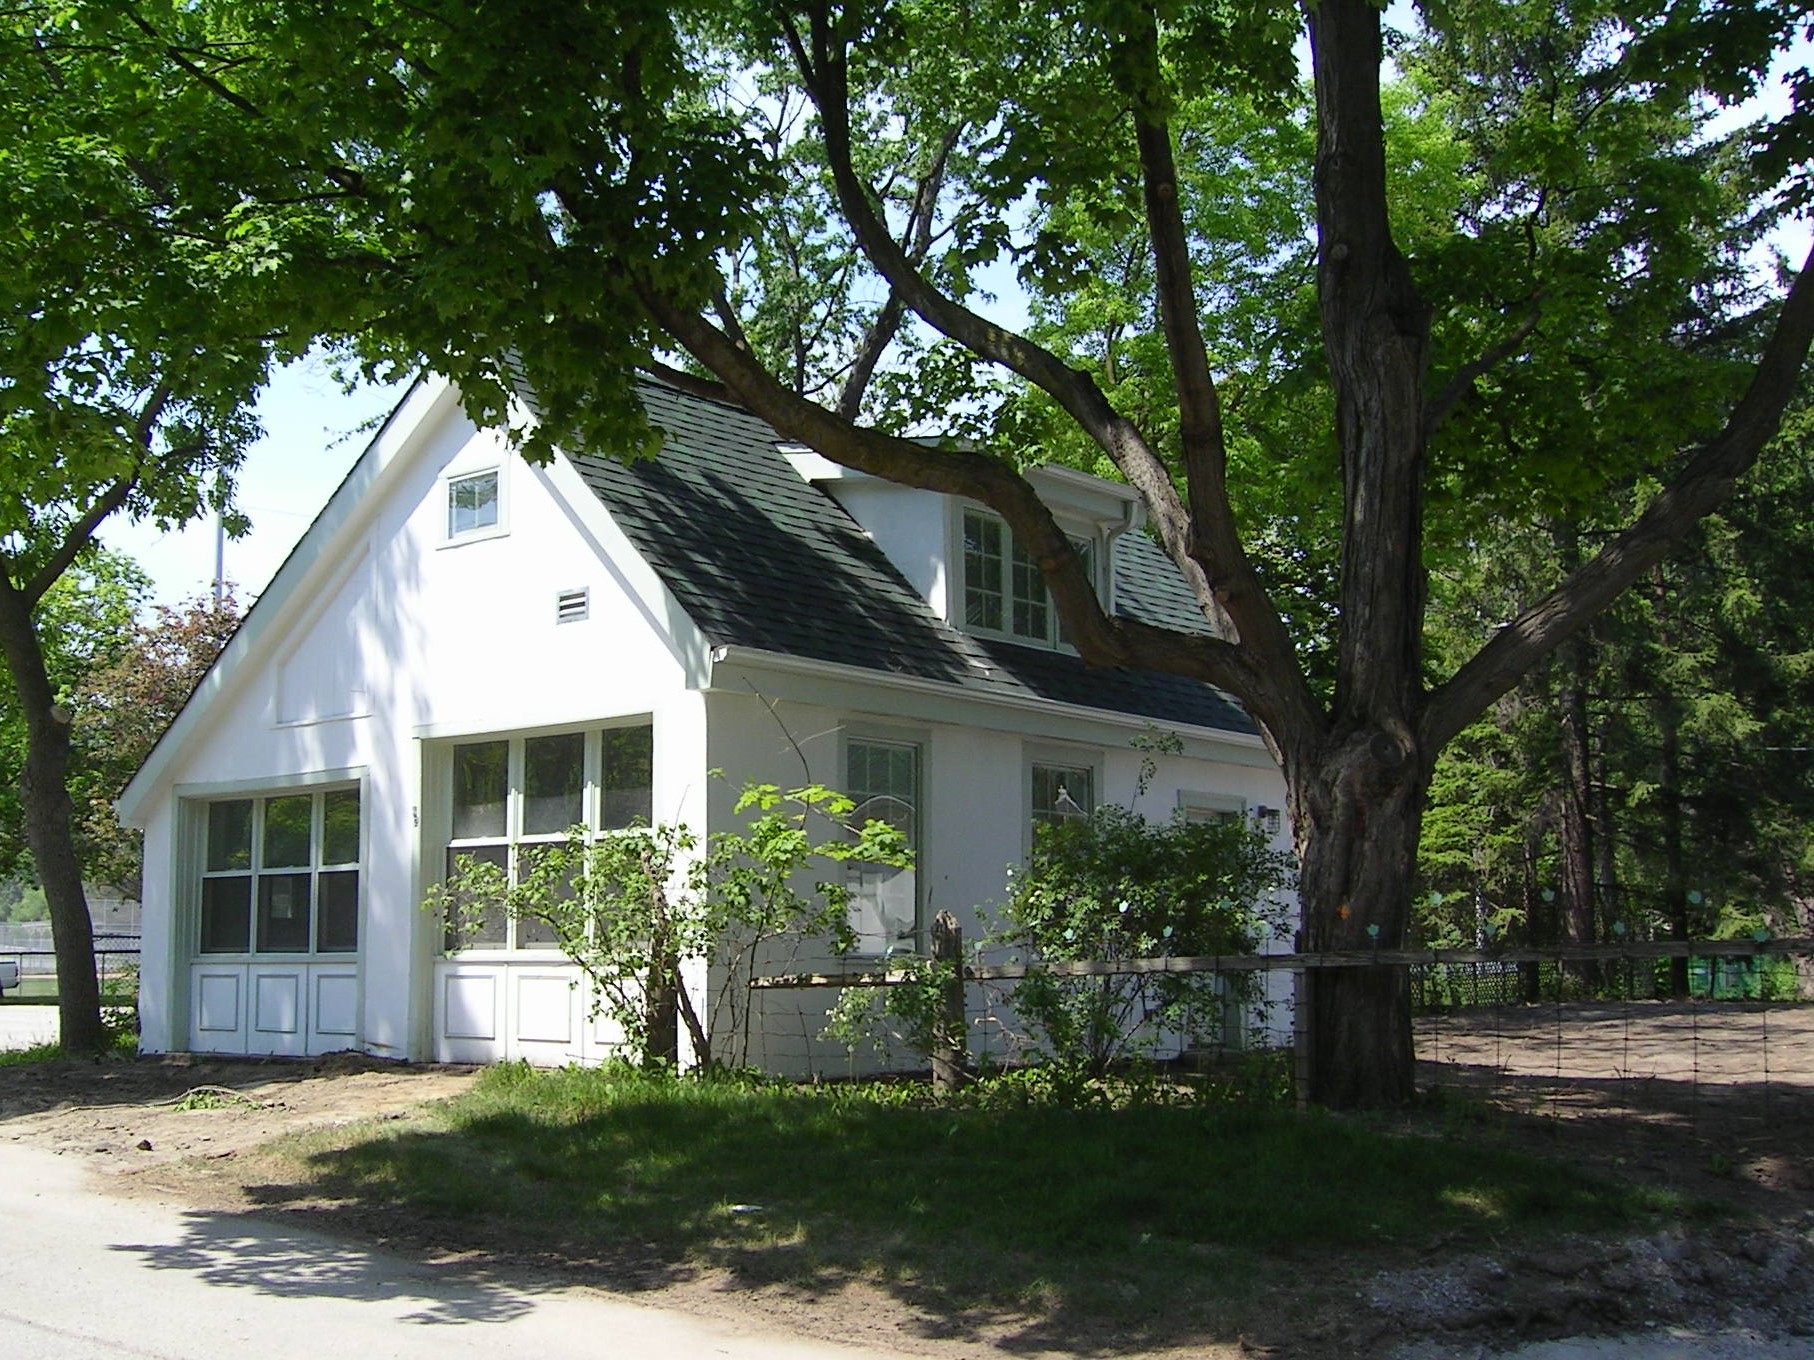 Studio at 42 Old Yonge St., Thornhill